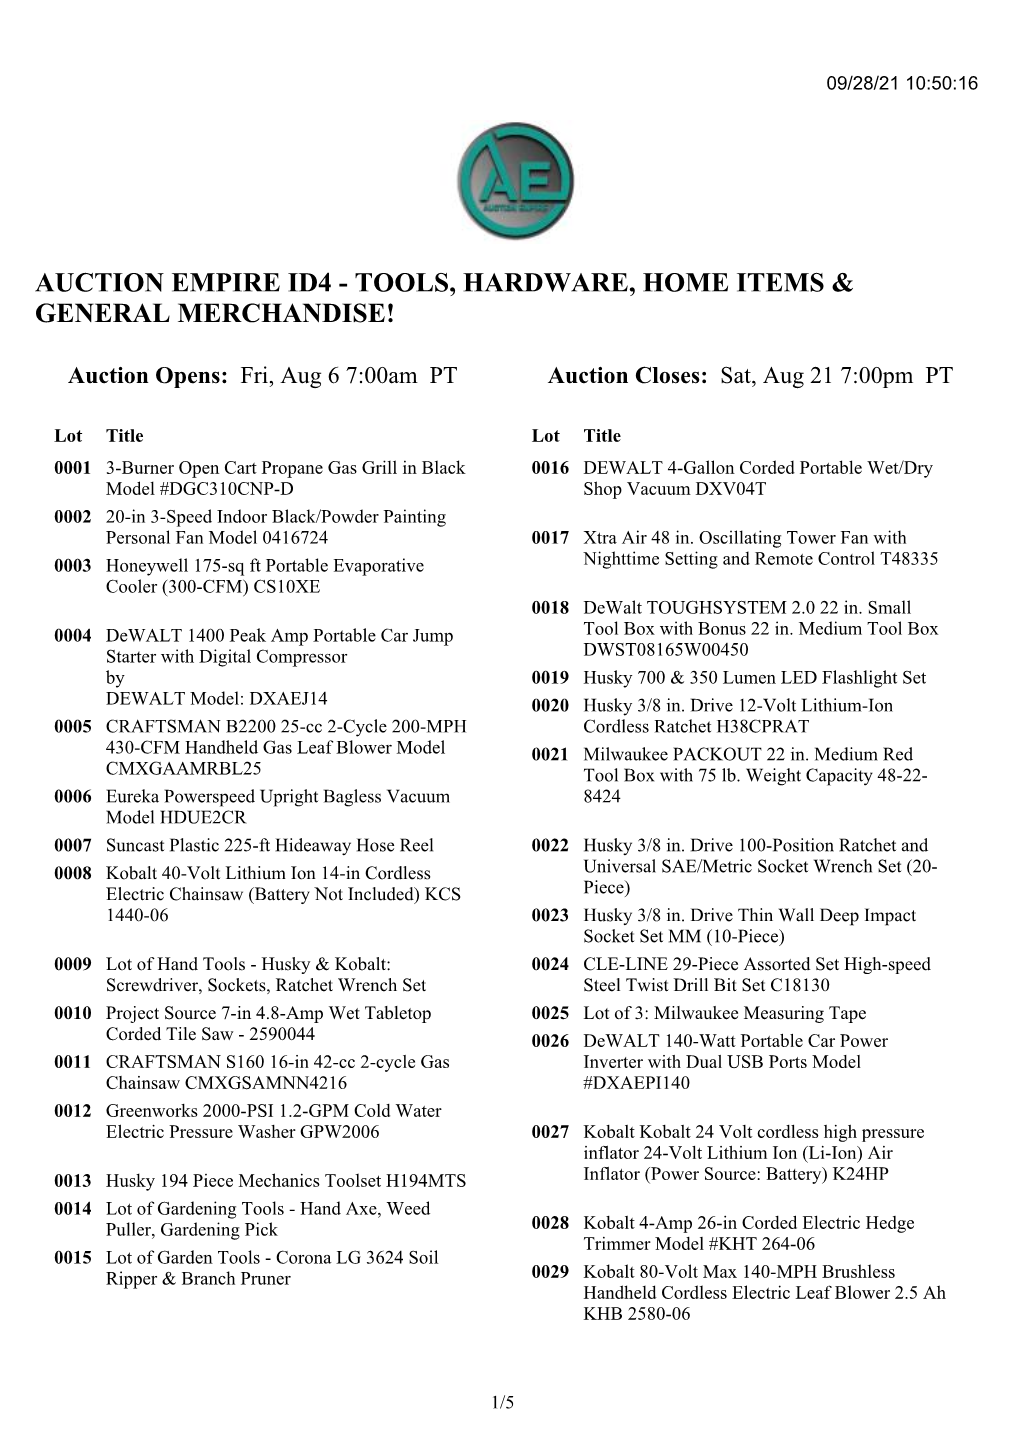 Auction Empire Id4 - Tools, Hardware, Home Items & General Merchandise!